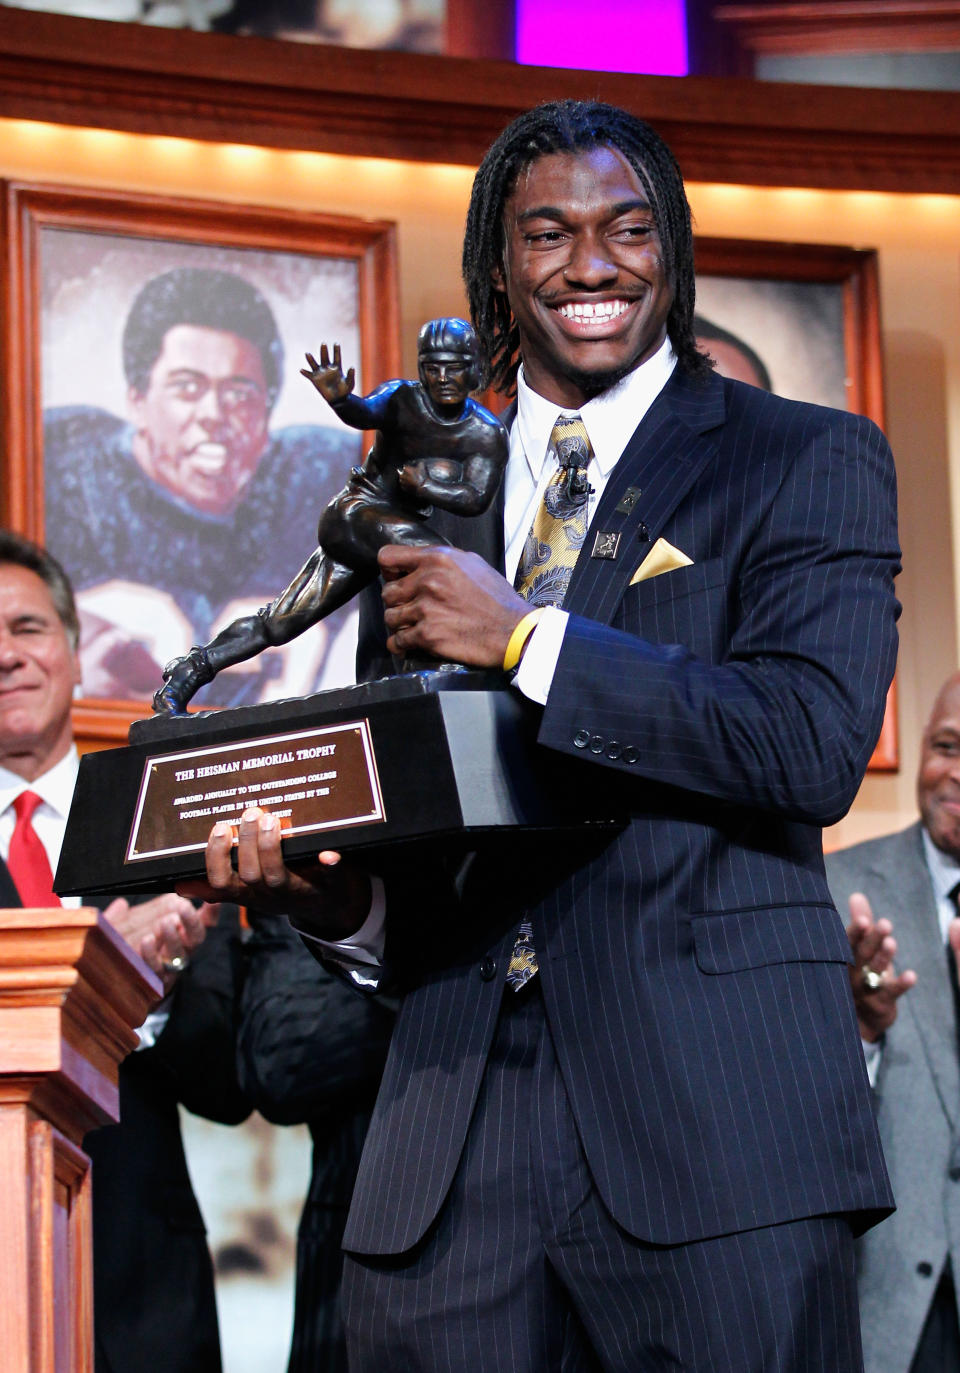 NEW YORK, NY - DECEMBER 10: (EDITORIAL USE ONLY THROUGH DECEMBER 15, 2011, NO ARCHIVE, NO SALES) In this handout provided by the Heisman Trophy Trust. Robert Griffin III of the Baylor Bears poses with the trophy after being named the 77th Heisman Memorial Trophy Award winner at the Best Buy Theater on December 10, 2011 in New York City. (Photo by Kelly Kline/Heisman Trophy Trust via Getty Images)